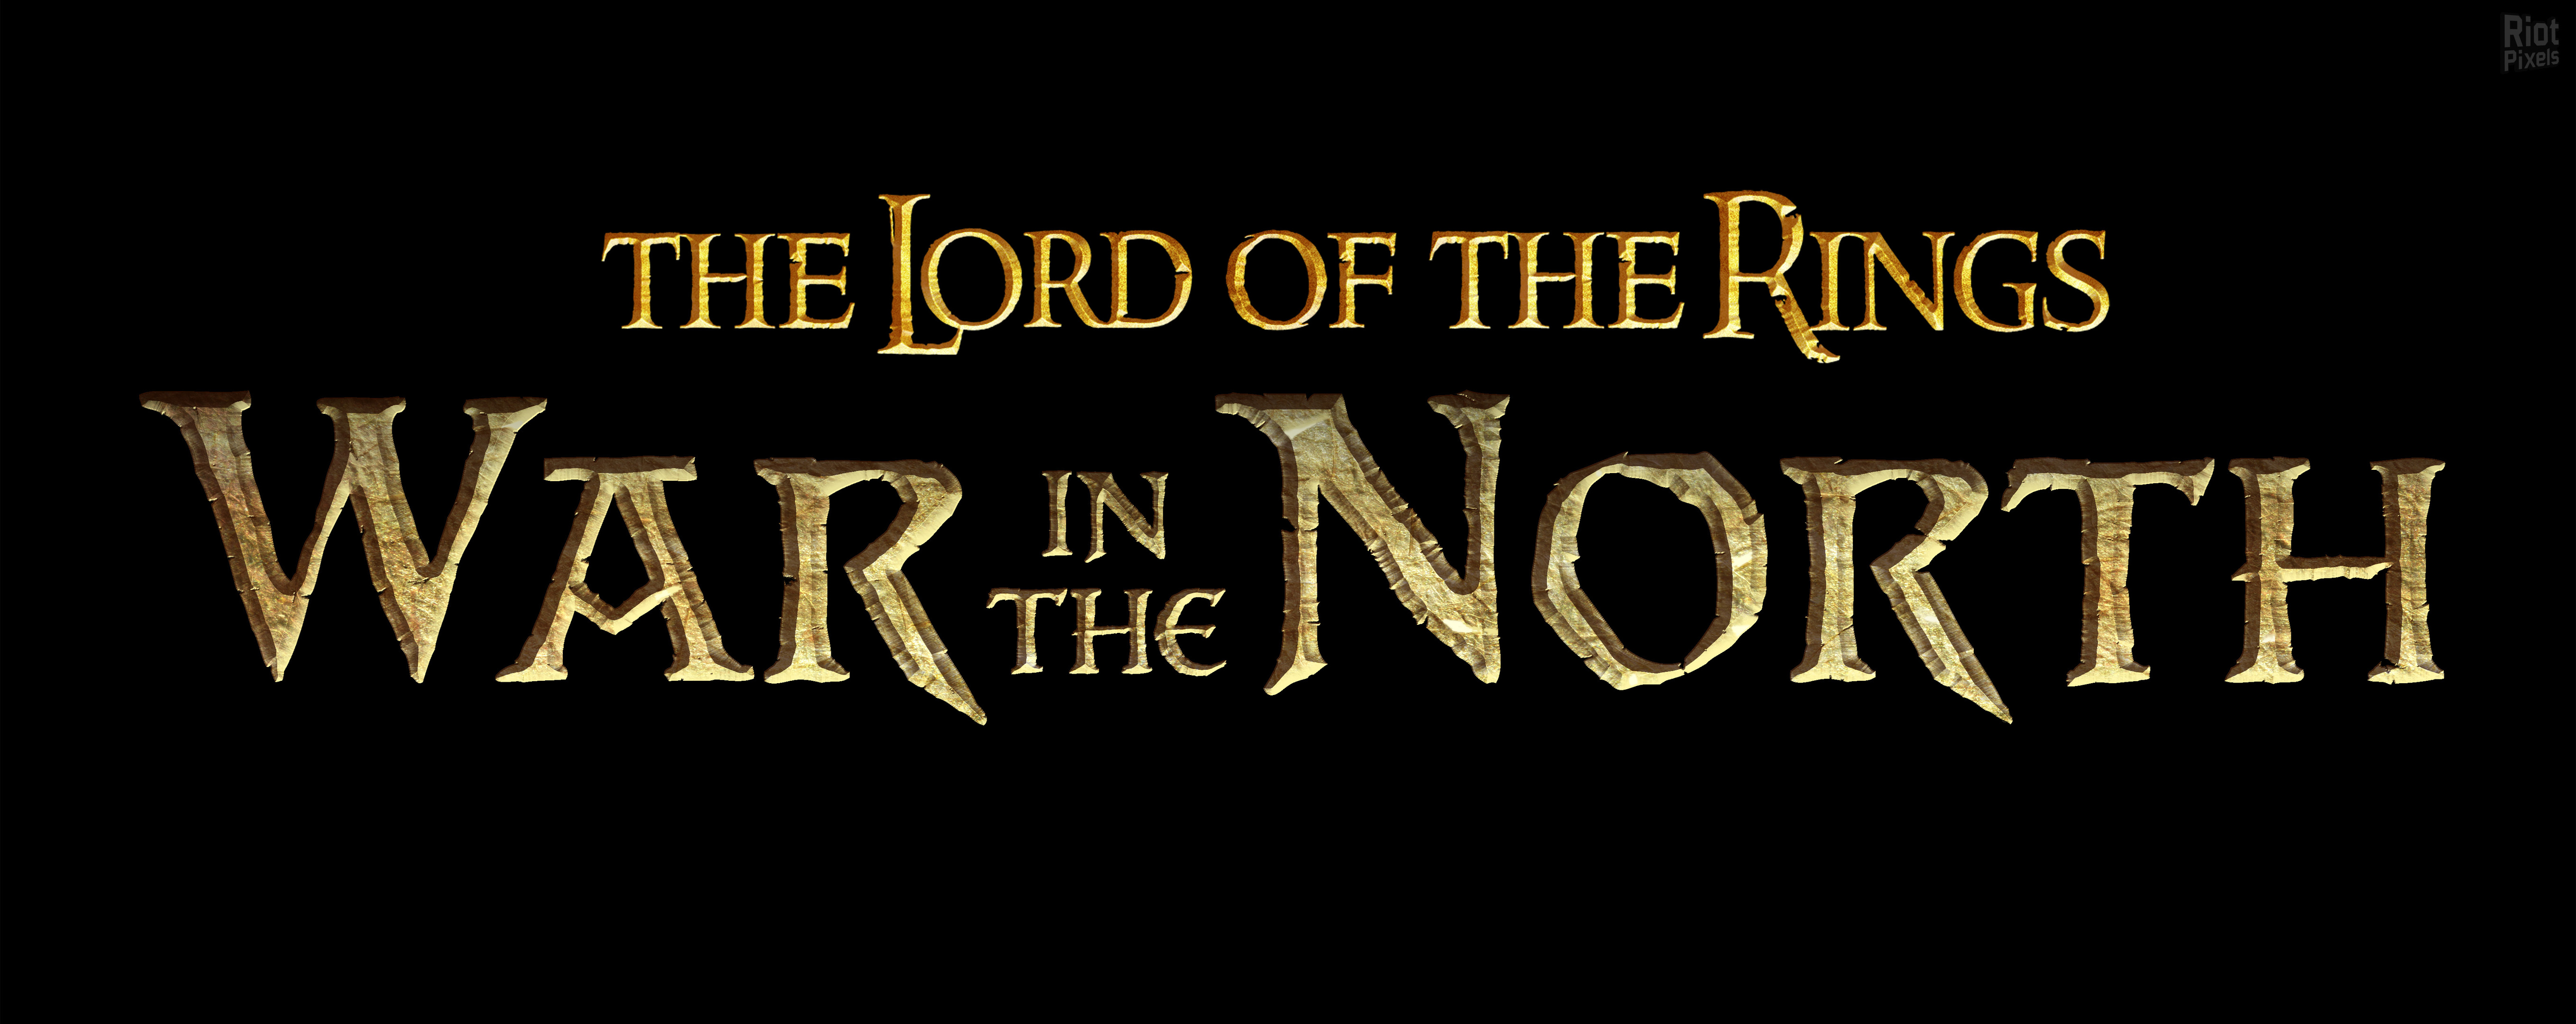 Lord of the rings war in the north купить steam фото 46